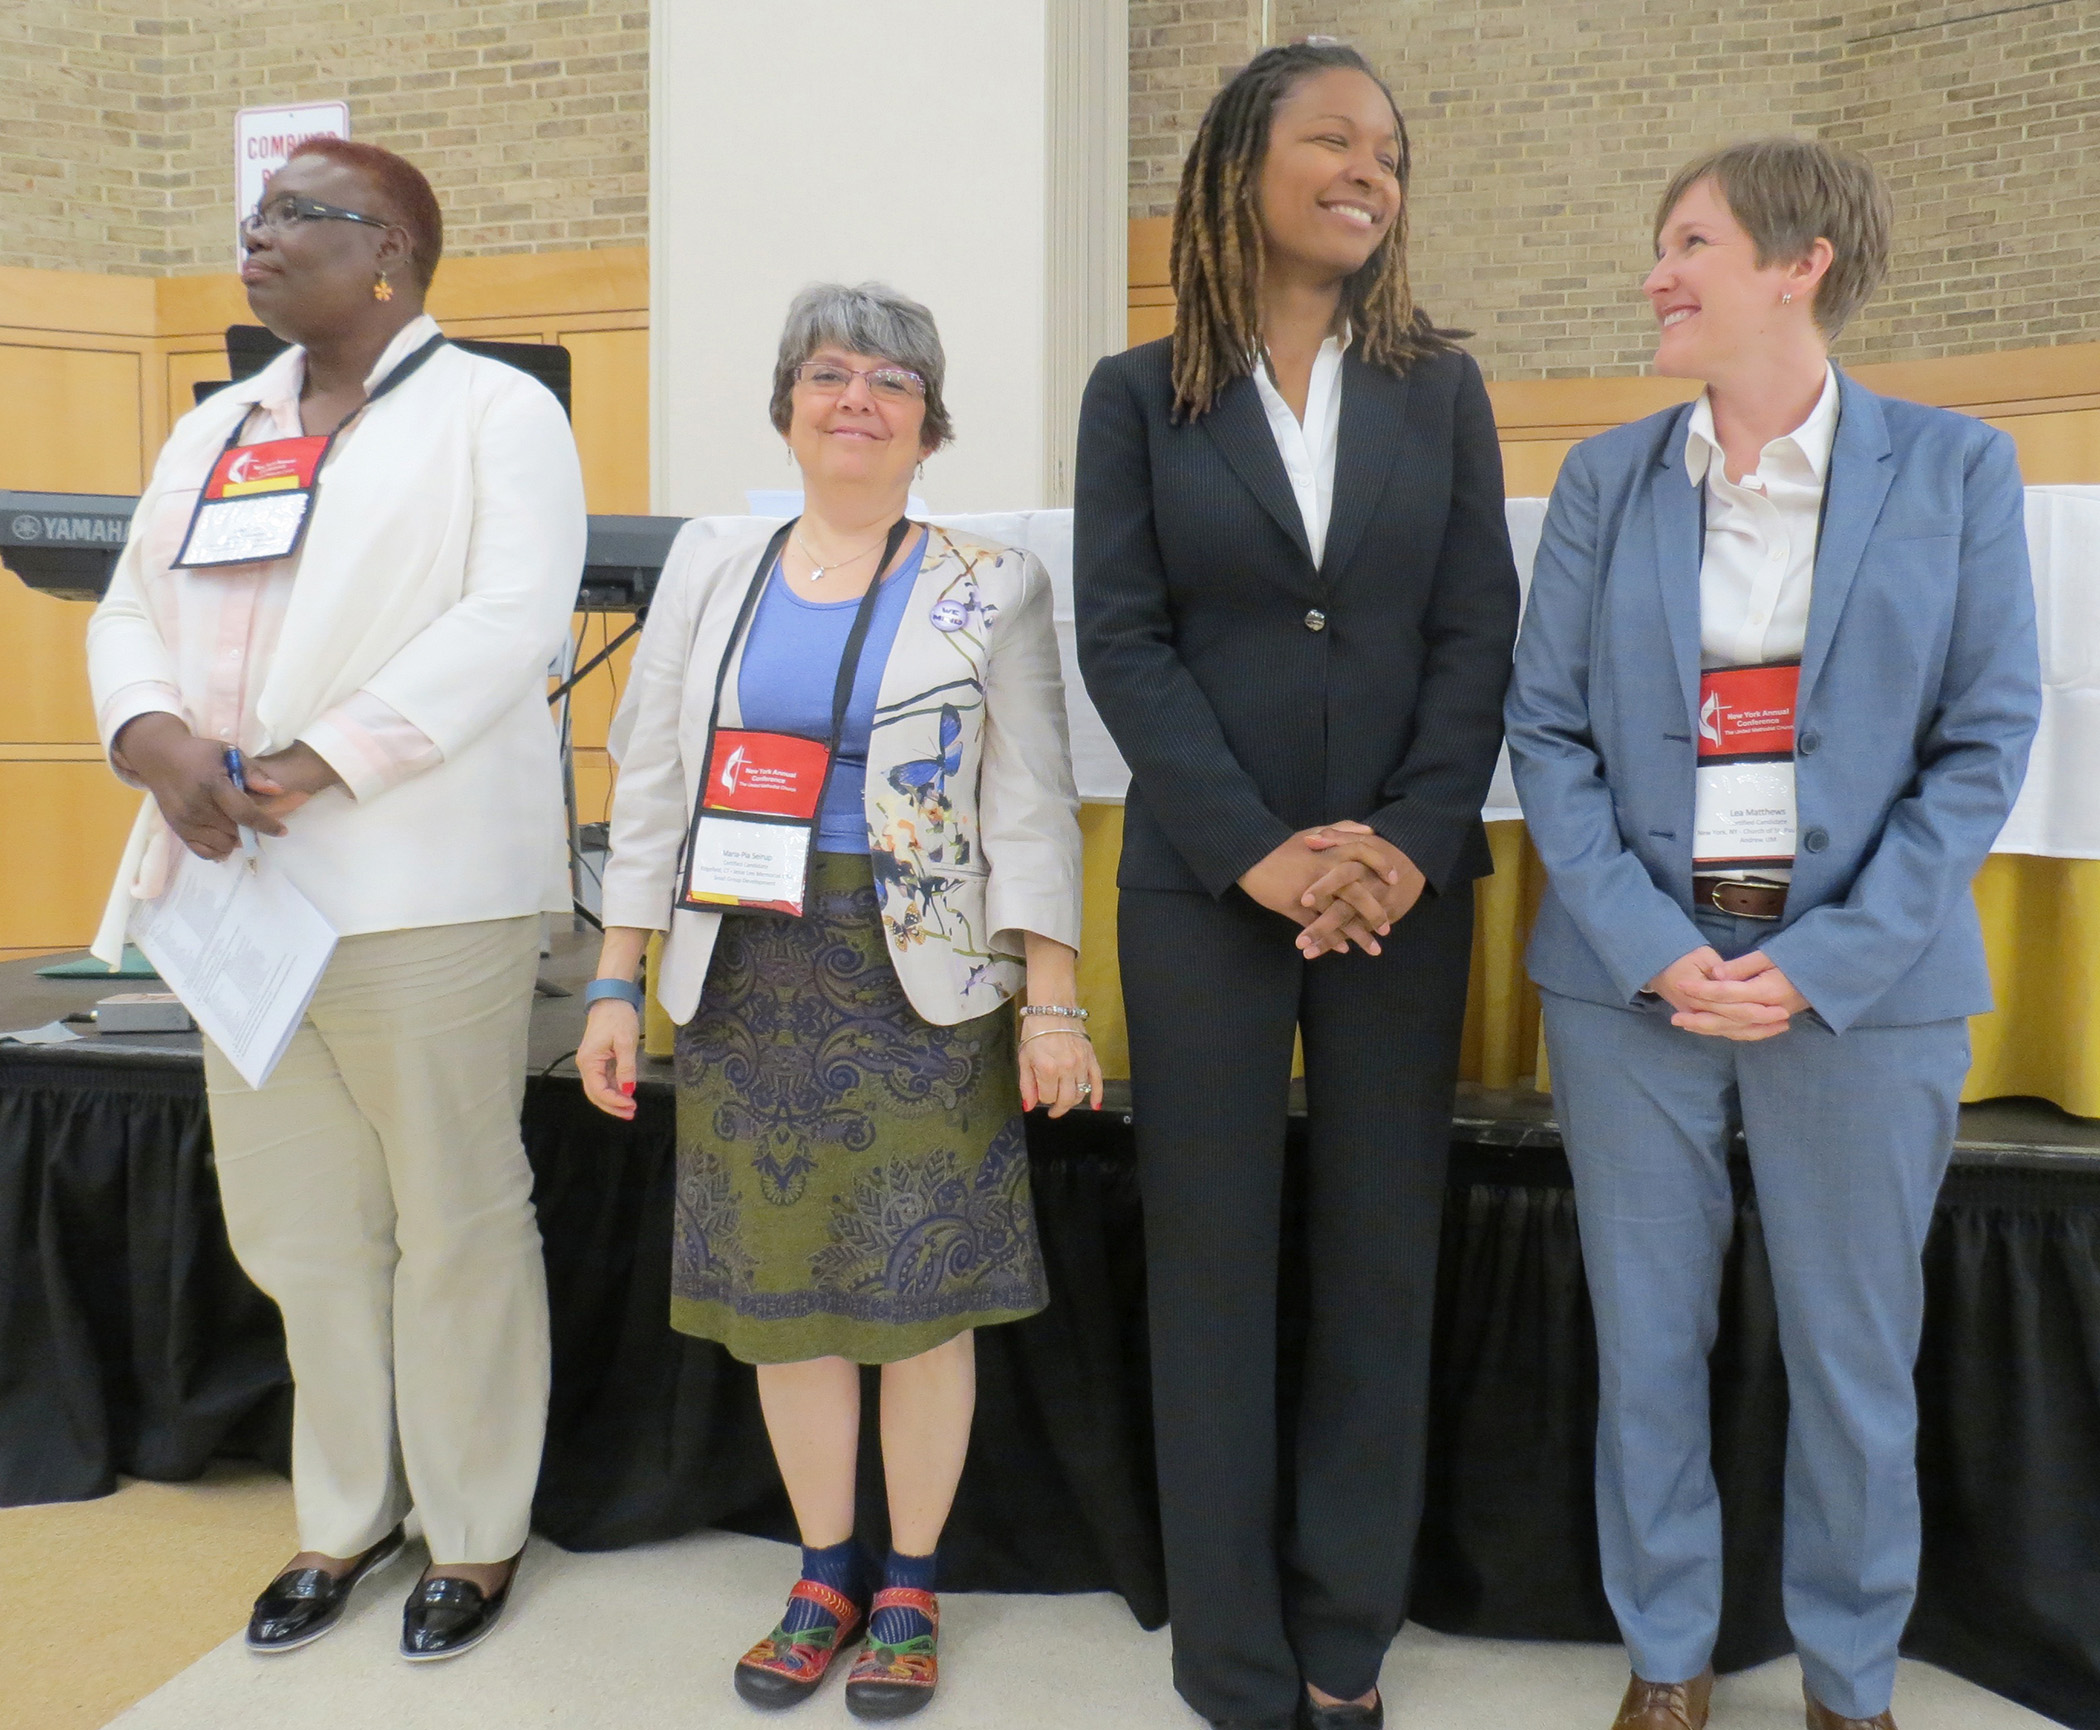 Elyse Ambrose, second from right, and Lea Matthews, far right, were among group approved as provisional deacons by the New York Conference. Photo by Joanne Utley